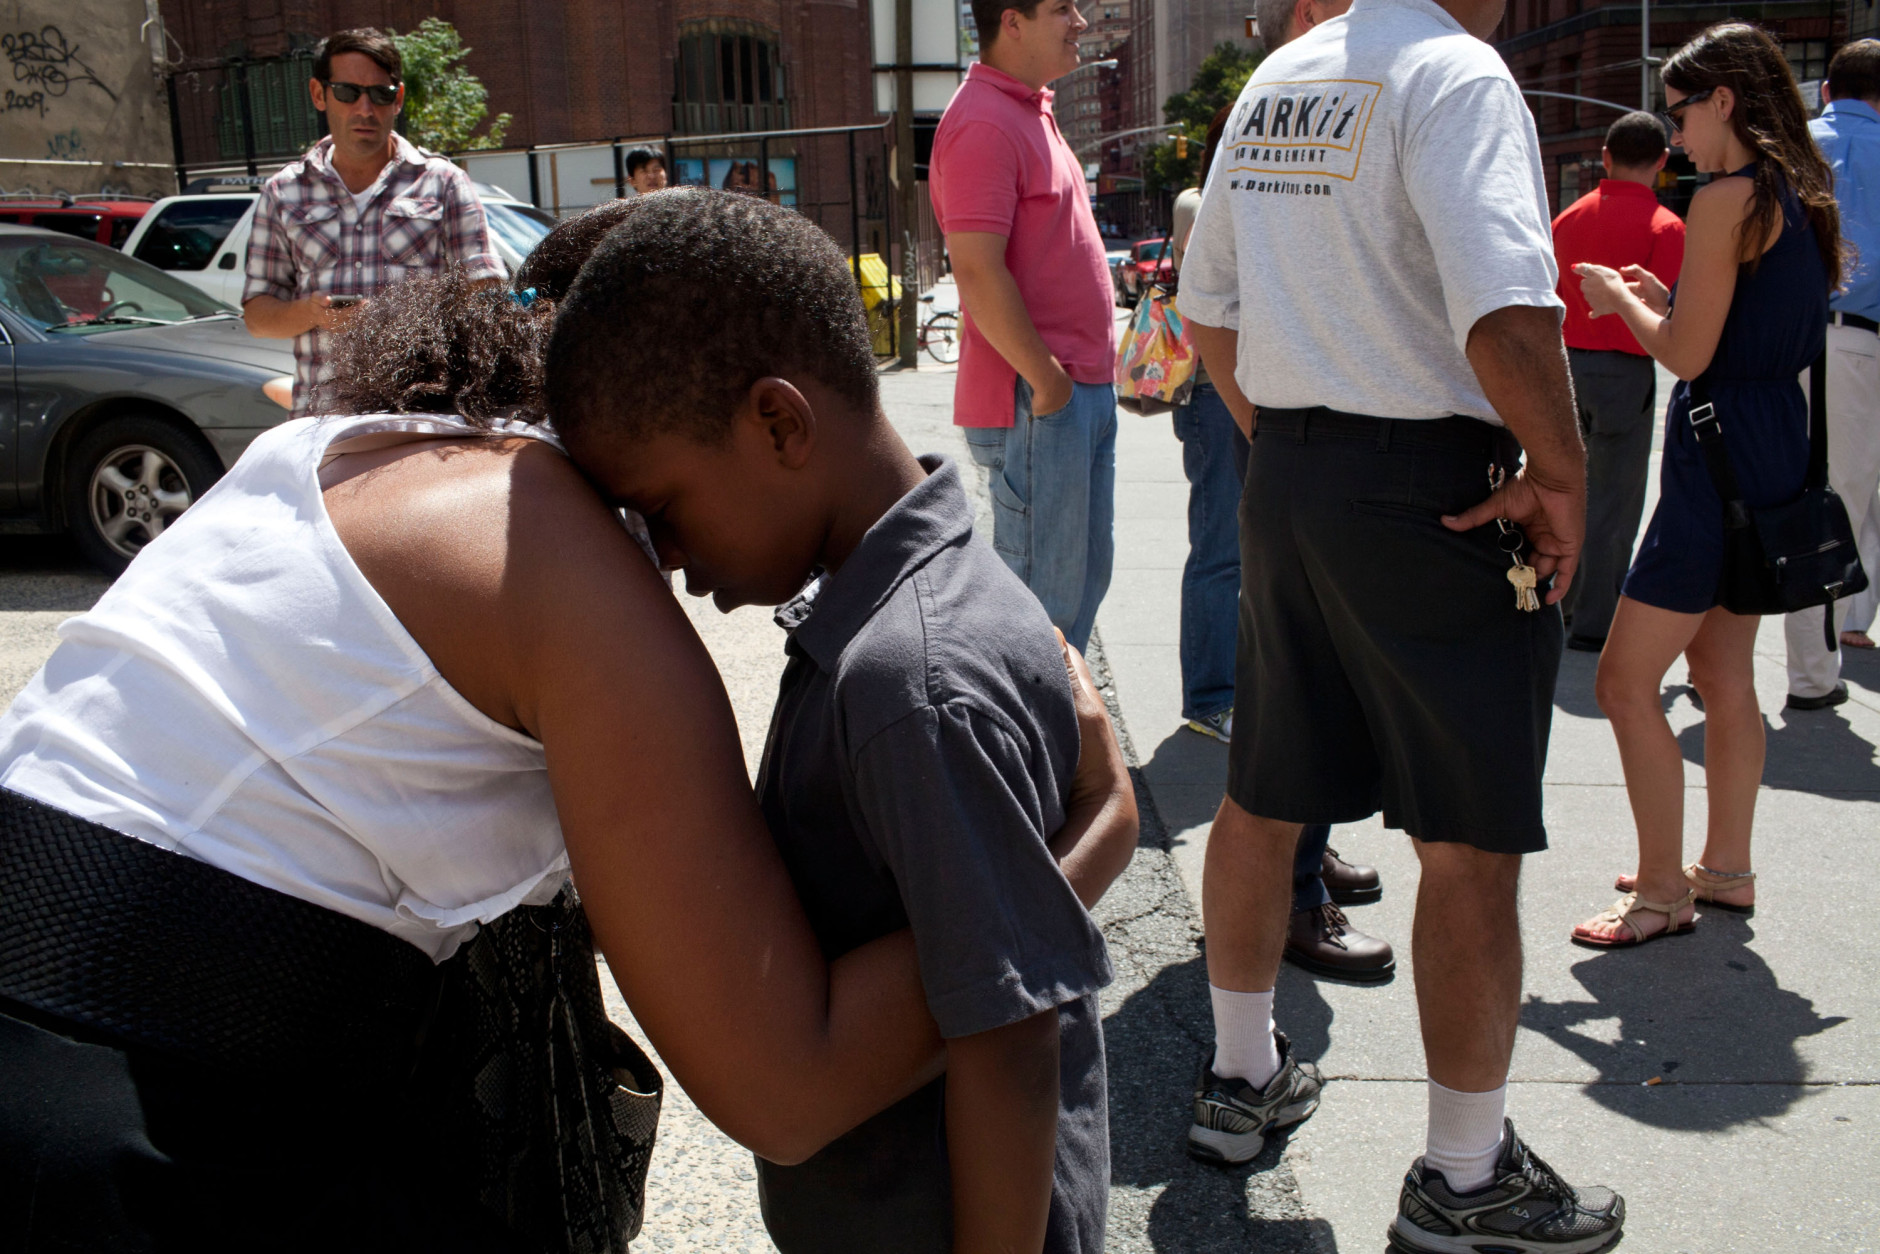 NEW YORK, NY - AUGUST 23:  Suzanne Beatty comforts her son Quentin Beatty, 7, on a street in TriBeCa after a 5.8  earthquake struck on August 23, 2011 in New York, United States. The epicenter of the 5.8  earthquake was located near Louisa in central Virginia. Two nuclear power plants at the North Anna Power Station in the same county were reportedly taken offline. (Photo by Andrew Burton/Getty Images)